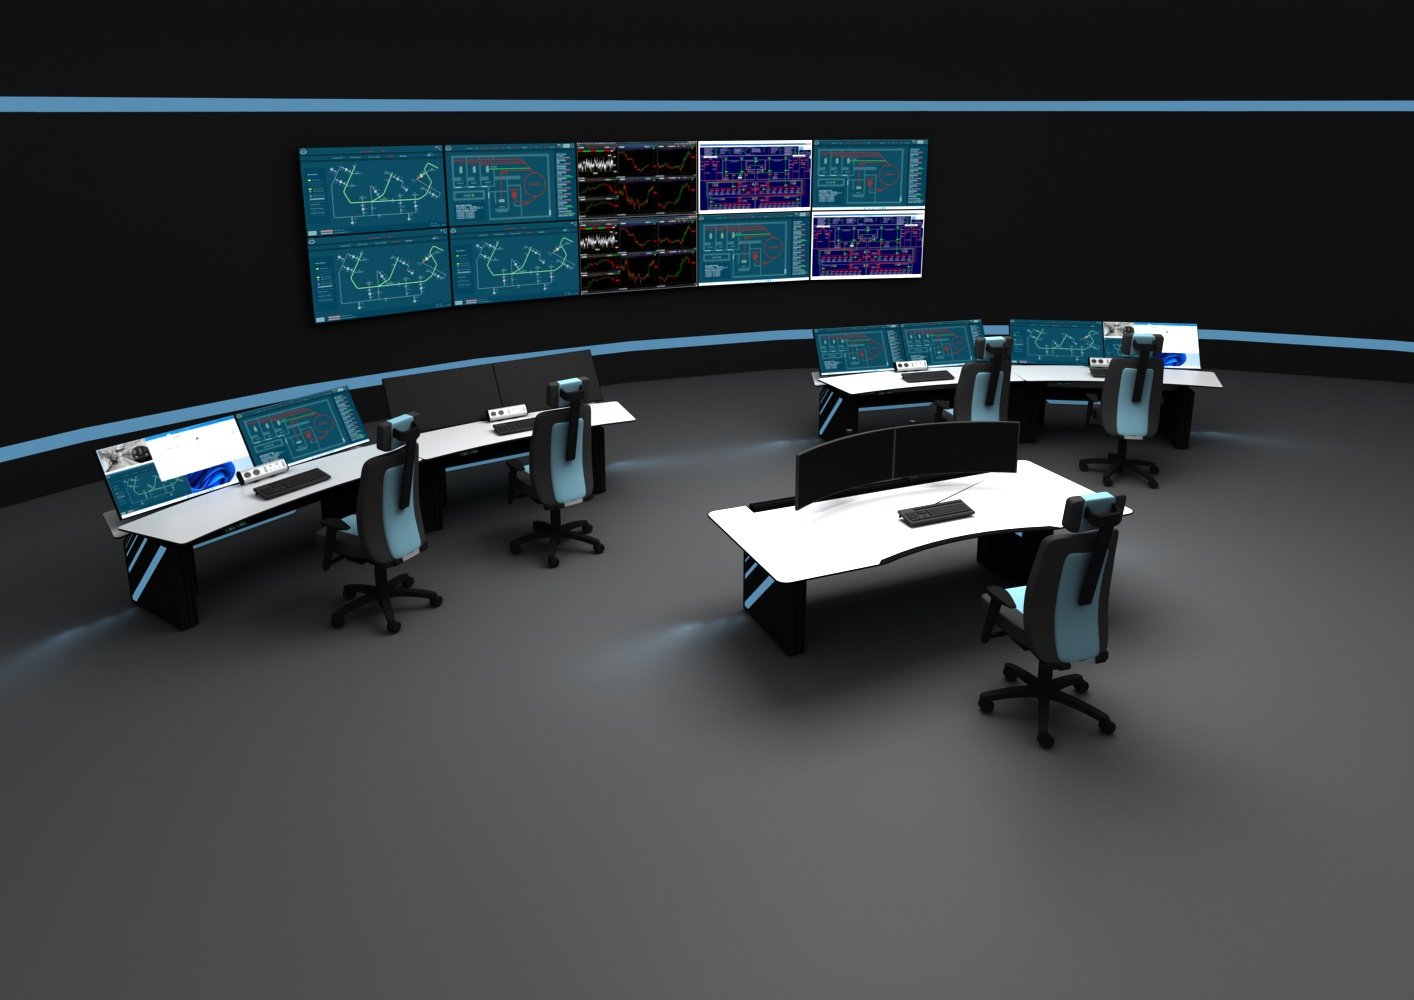 6 things to consider in the design of a custom control room console